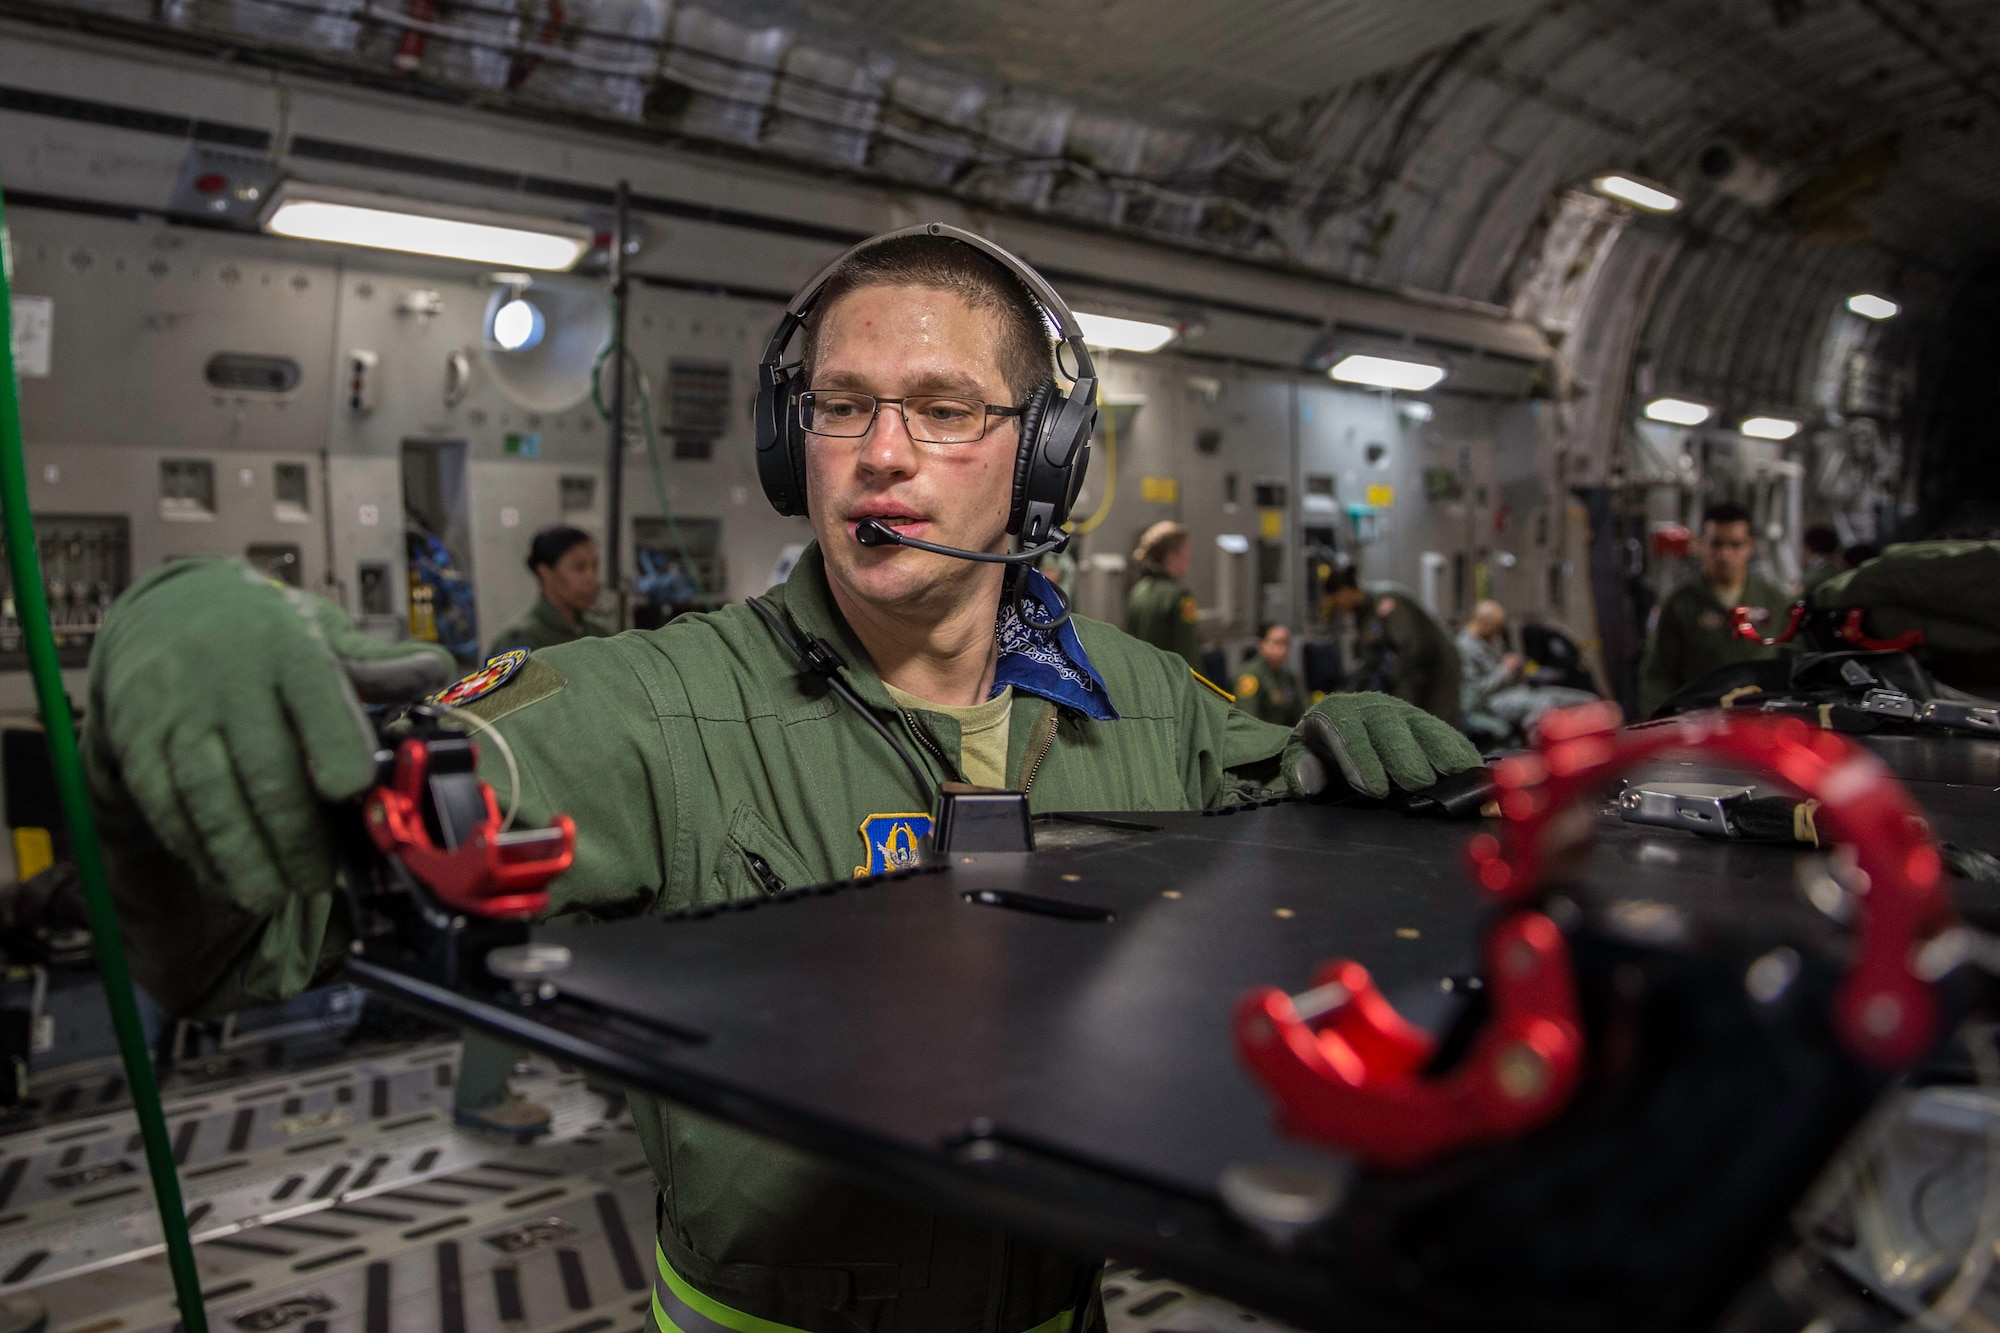 Tech. Sgt. James Laska finishes configuring a newly approved C-17 stanchion litter system Feb. 22, 2015 during a training mission in San Juan, Puerto Rico. The mission was part of a three day fly-away with Airmen from the 315th Airlift Wing at Joint Base Charleston, S.C. and aeromedical Airmen from the 459th Air Refueling Wing at Joint Base Andrews, Md. The training mission was a cost-effective means to accomplish currency items and evaluations for flight crew members and provided C-17 familiarization and proficiency training for aeromedical Airmen. Laska is an aeromedical technician with the 459th Aeromedical Evacuation Squadron. (U.S. Air Force Photo/Tech. Sgt. Shane Ellis)